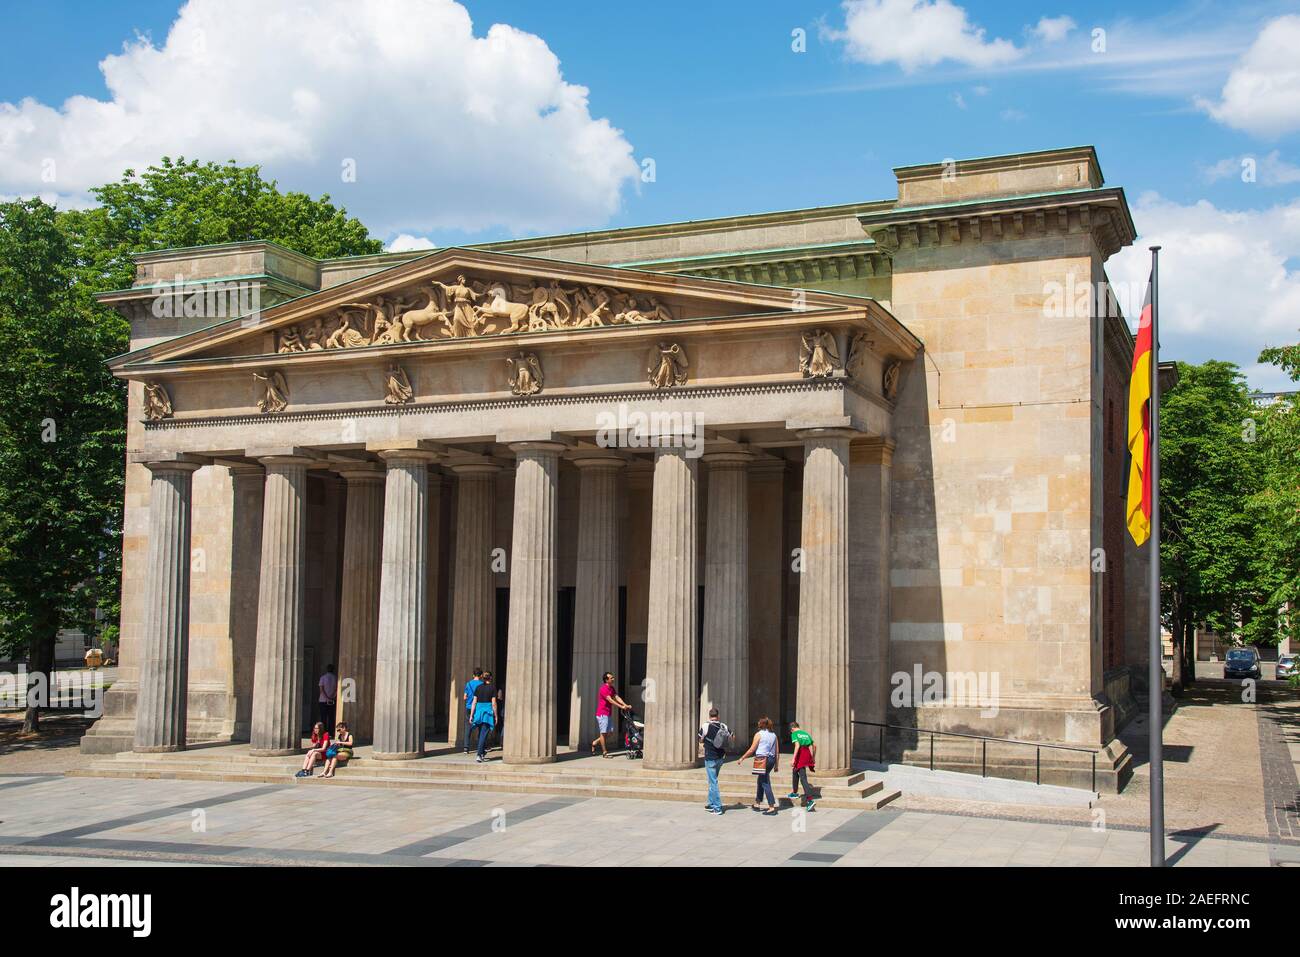 BERLIN, GERMANY - MAY 25, 2018: A view of the facade of the Neue Wache in Berlin, Germany, which serves as Central Memorial of the Federal Republic of Stock Photo